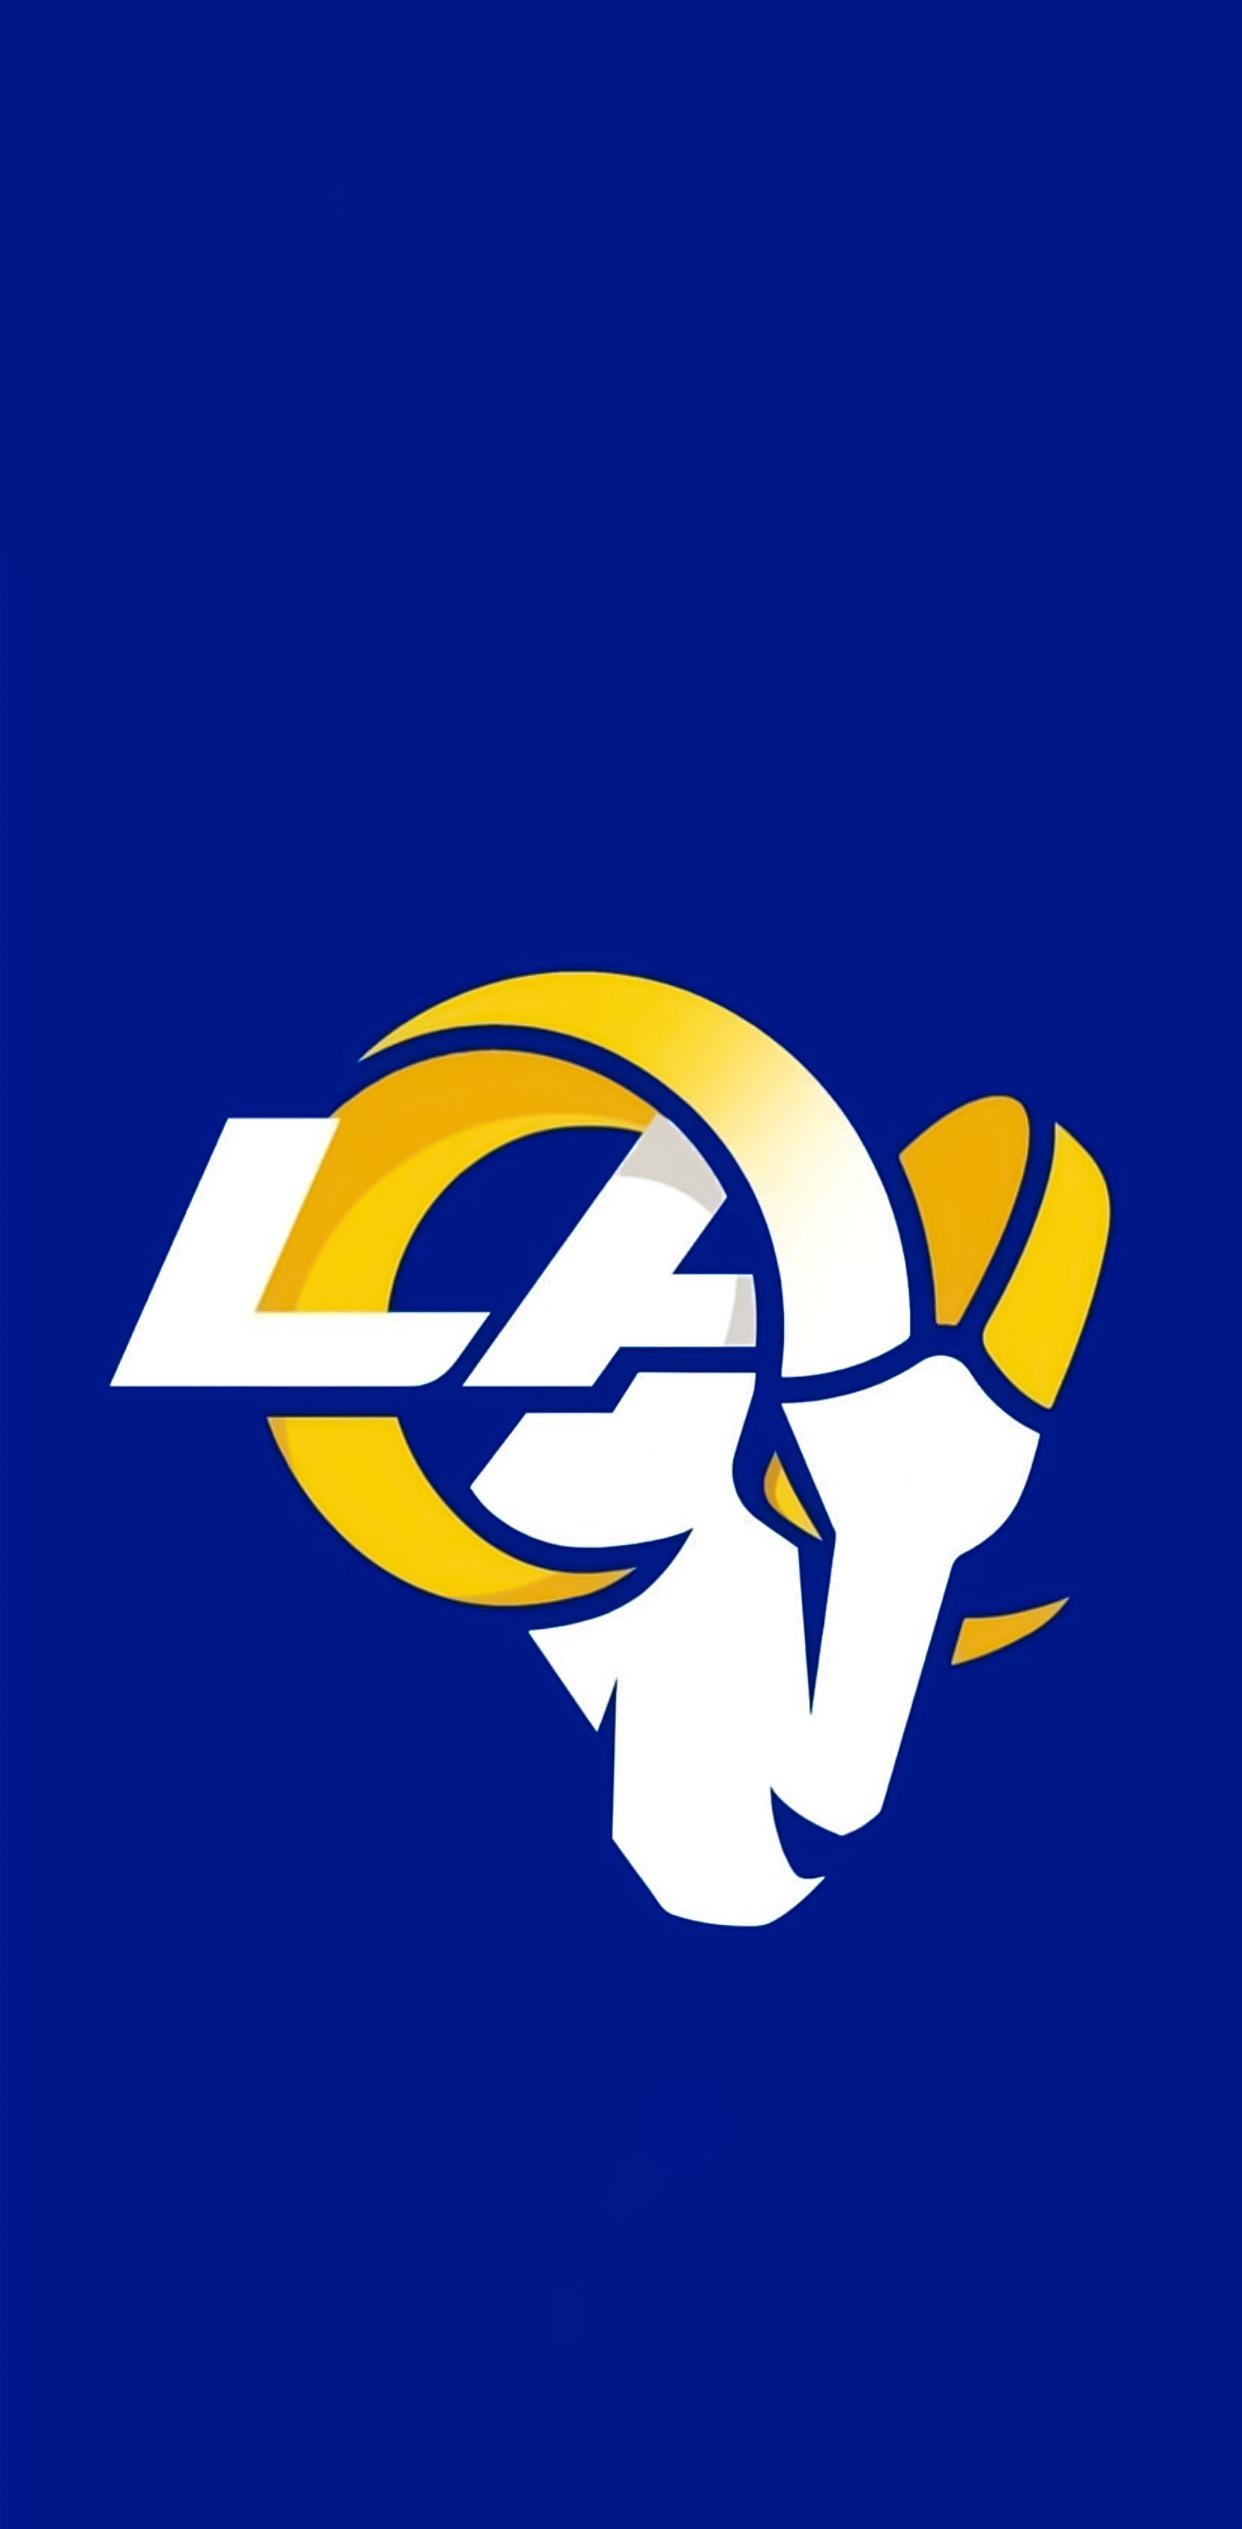 Los Angeles Rams, Sports team, iPhone wallpapers, Team backgrounds, 1250x2530 HD Handy